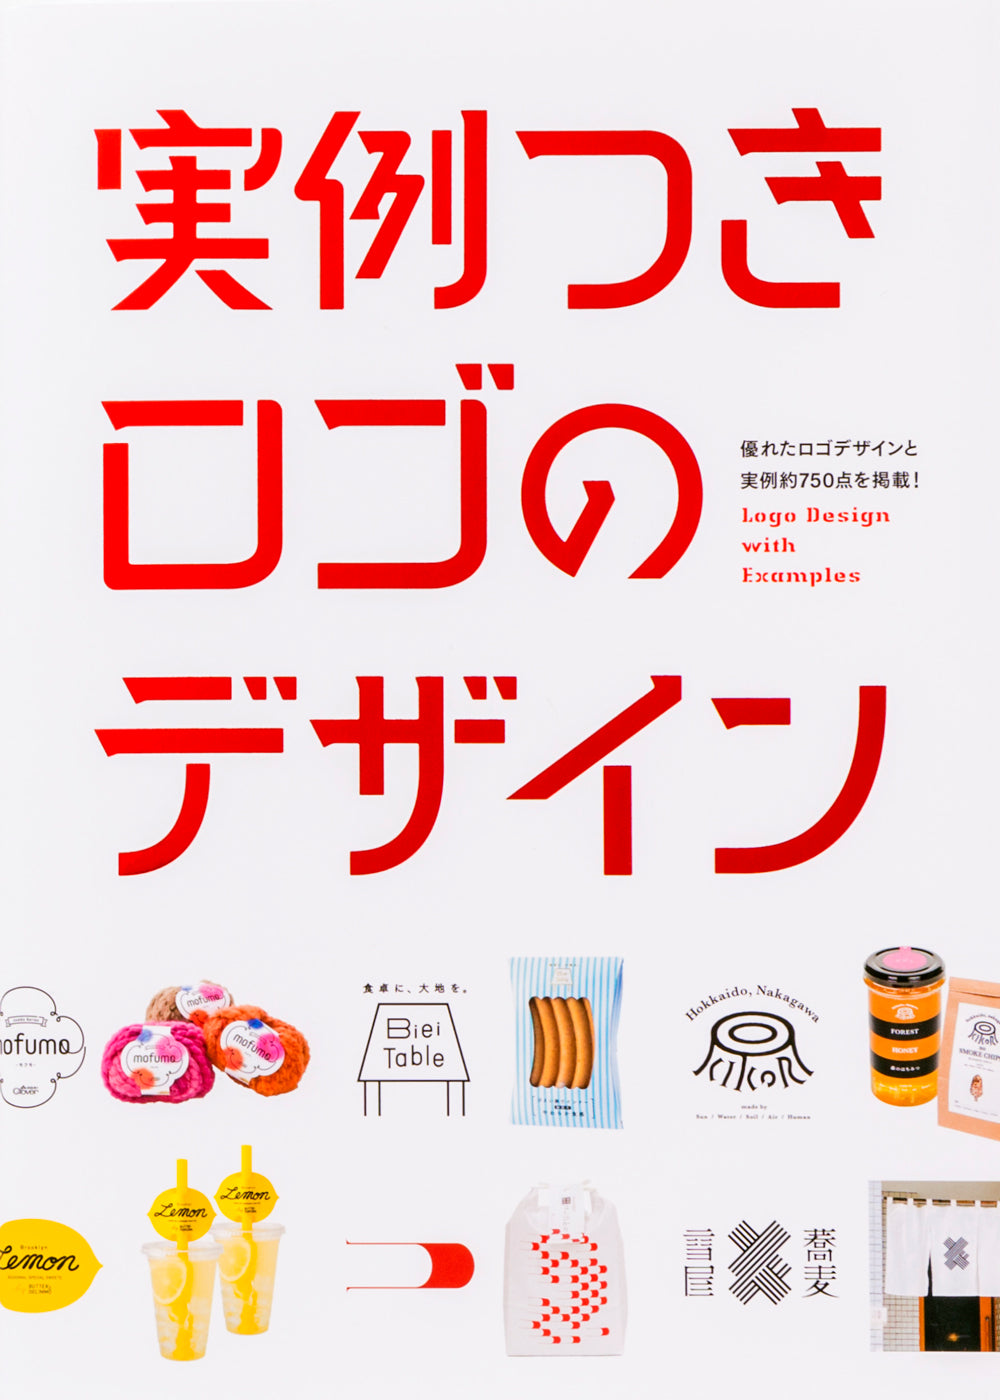 Logo Design with Examples (Japanese only, mostly visual) cover